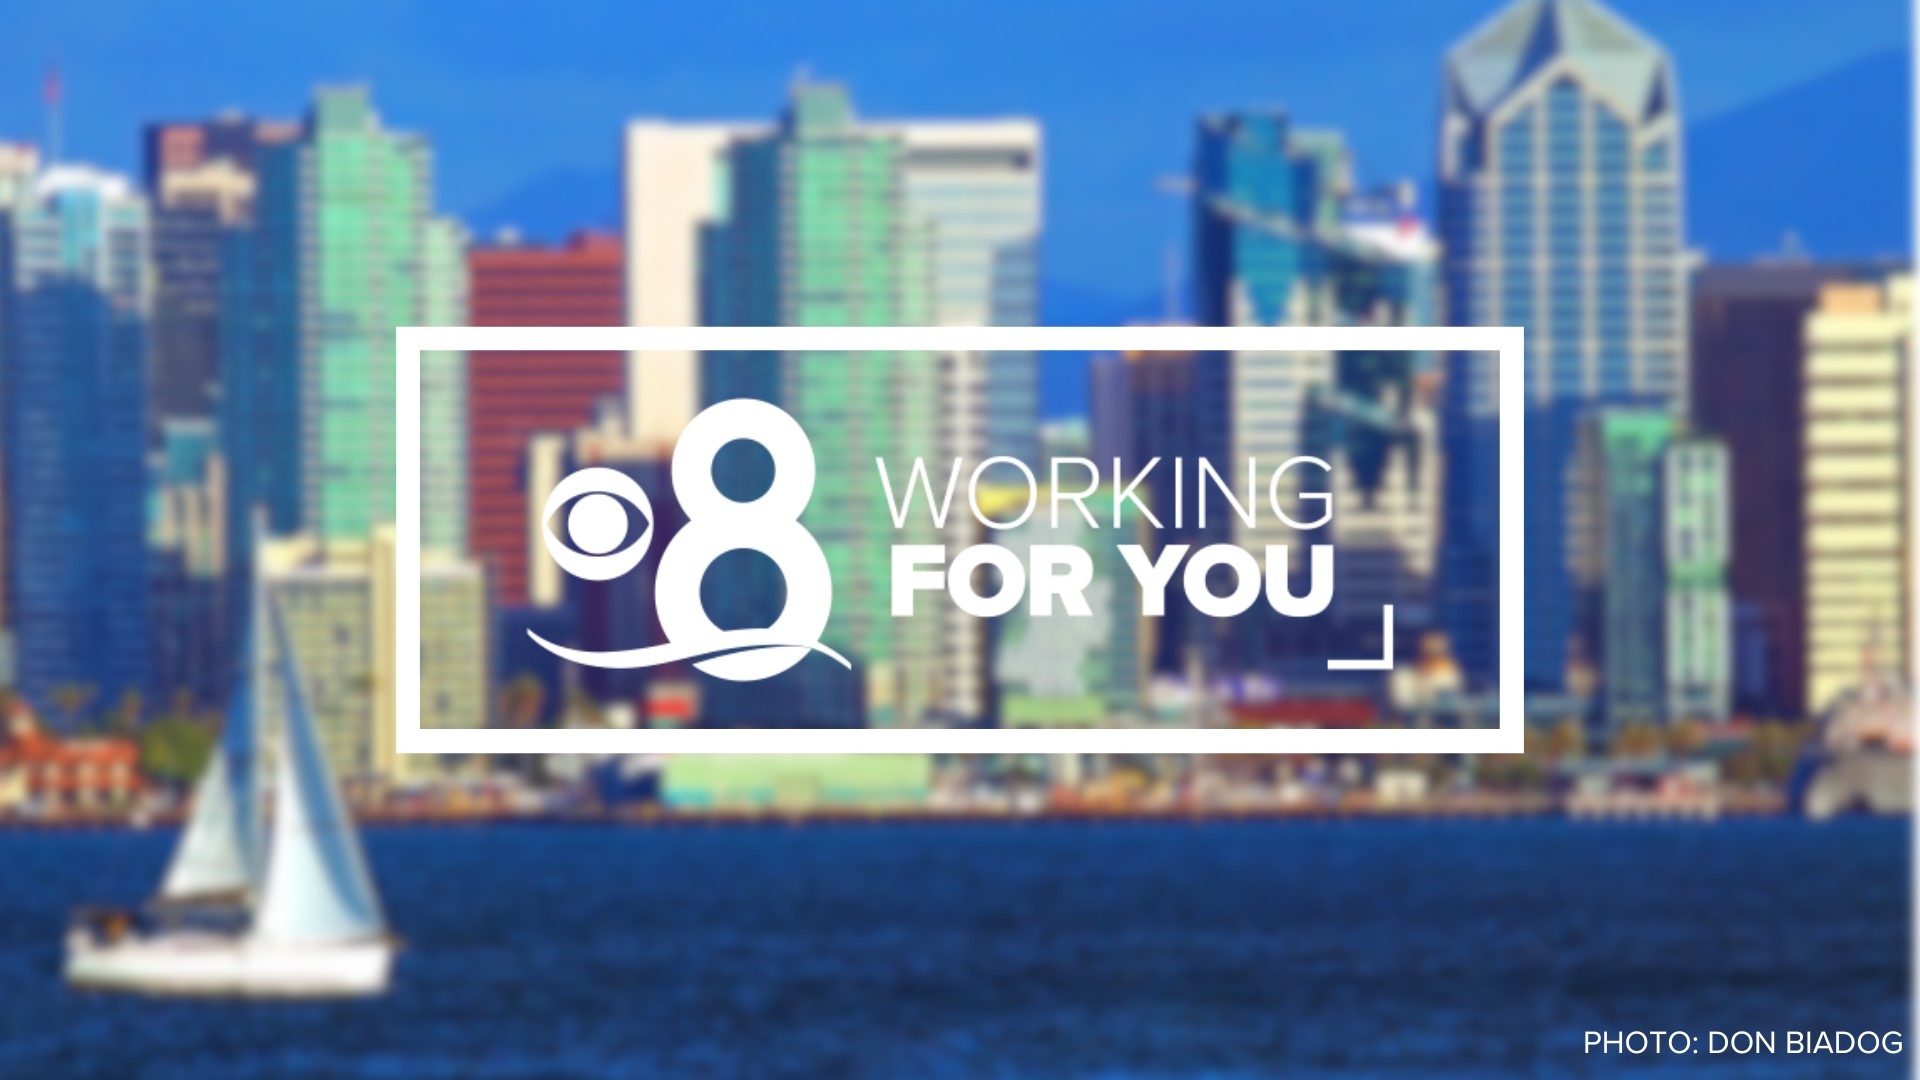 At CBS 8, we are always Working for You and our community. This is a station promise that we will go the extra mile to try and solve a problem our audience can’t.